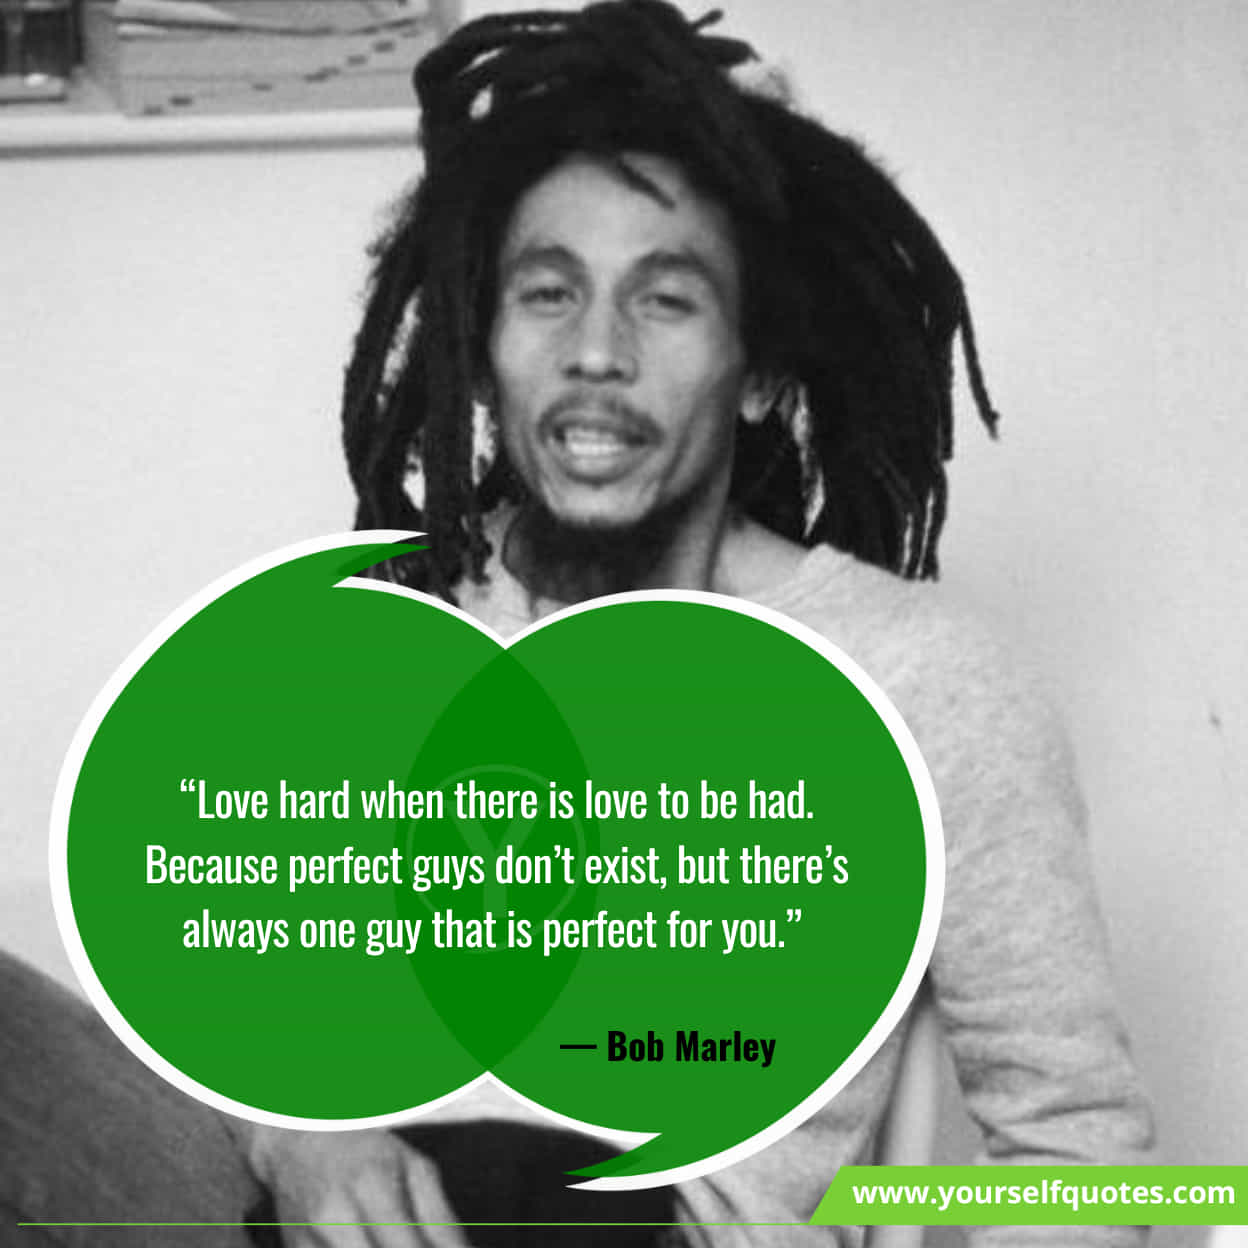 Bob Marley Quotes for Love